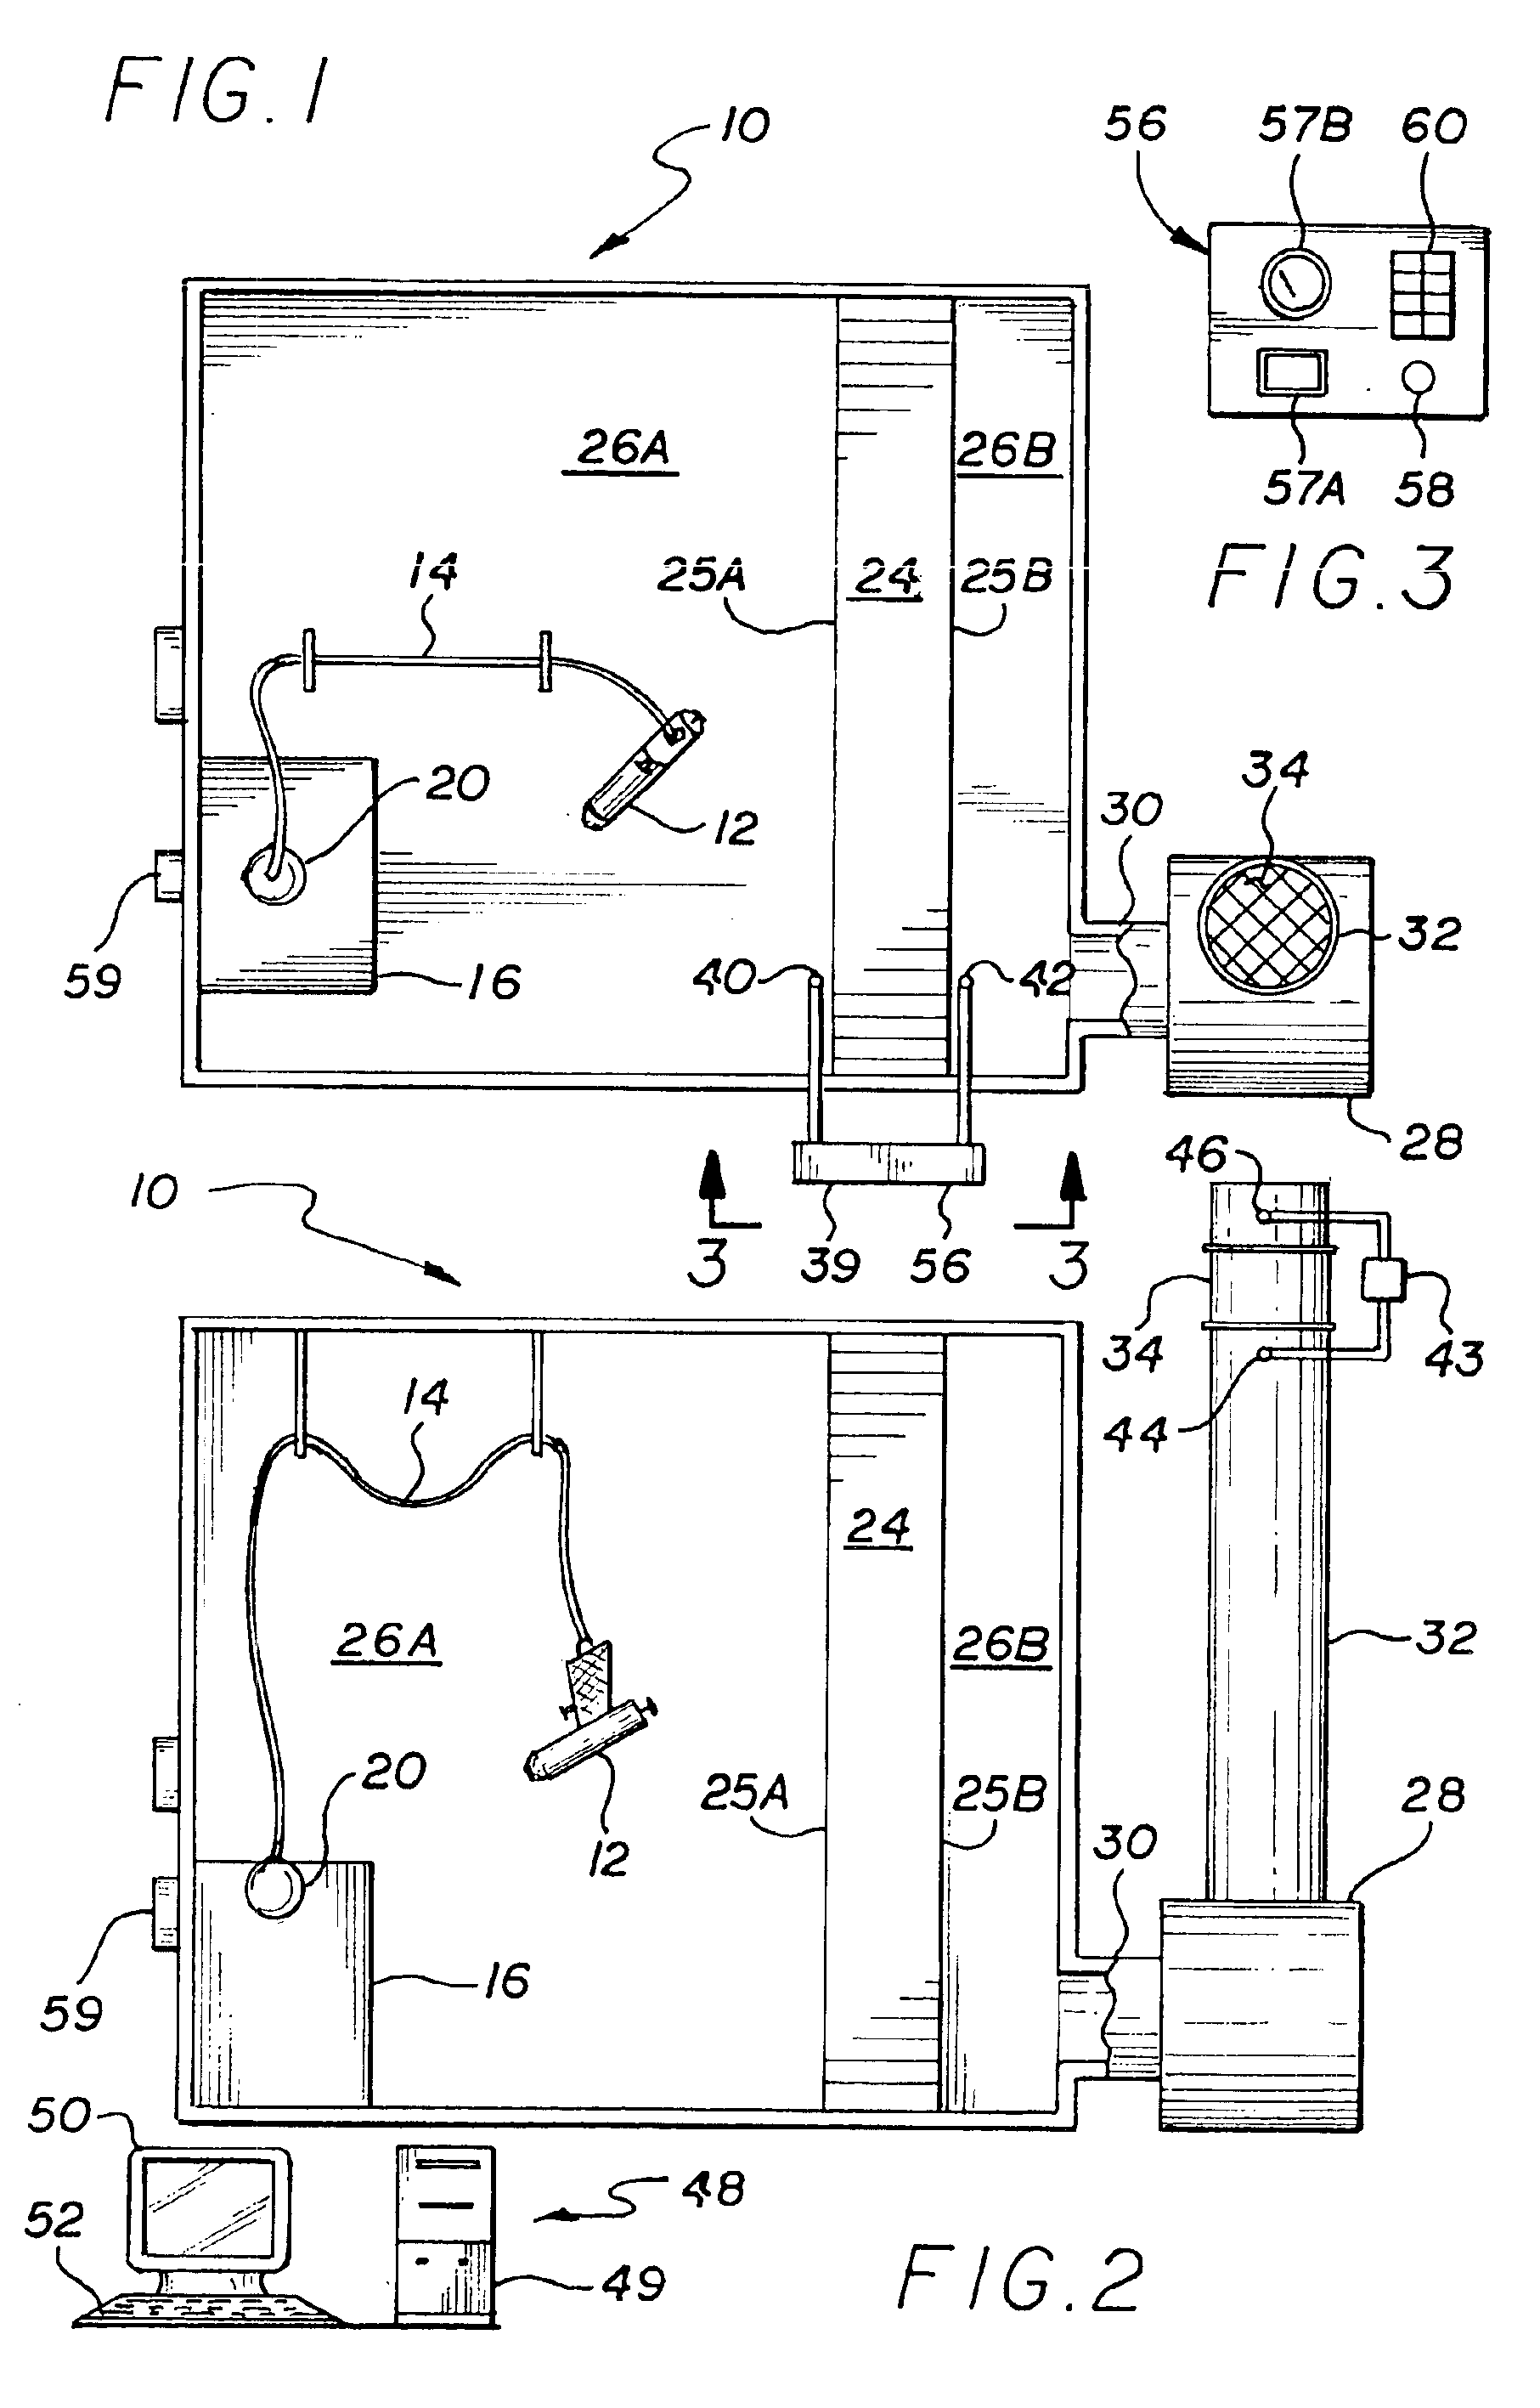 Method of monitoring a filter system for a paint spray booth